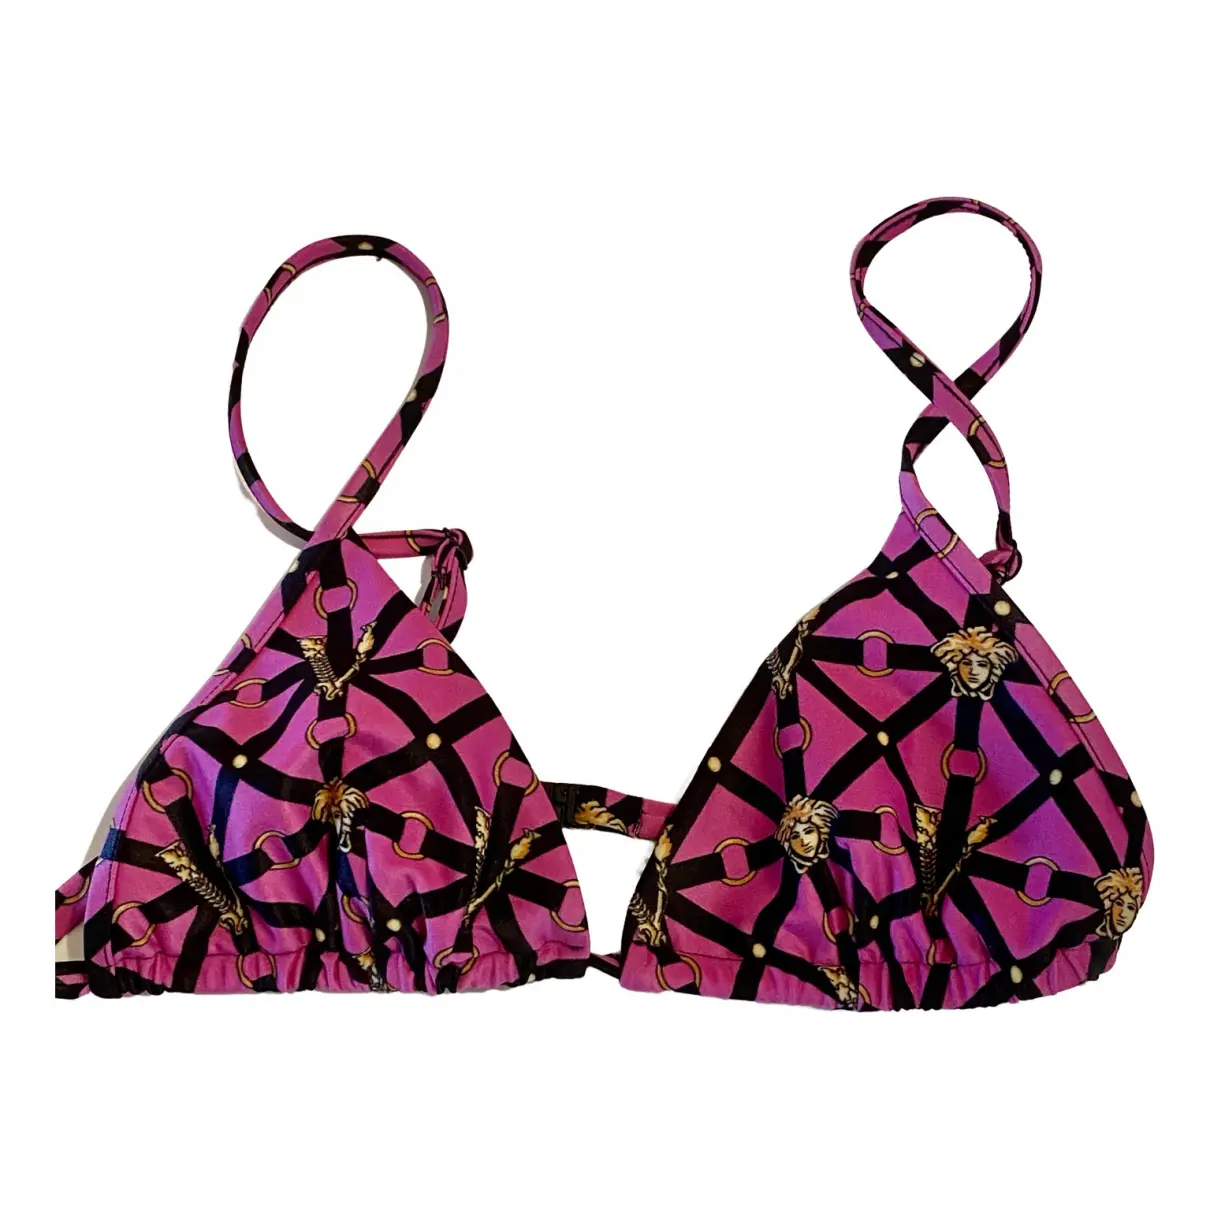 Two-piece swimsuit Versace